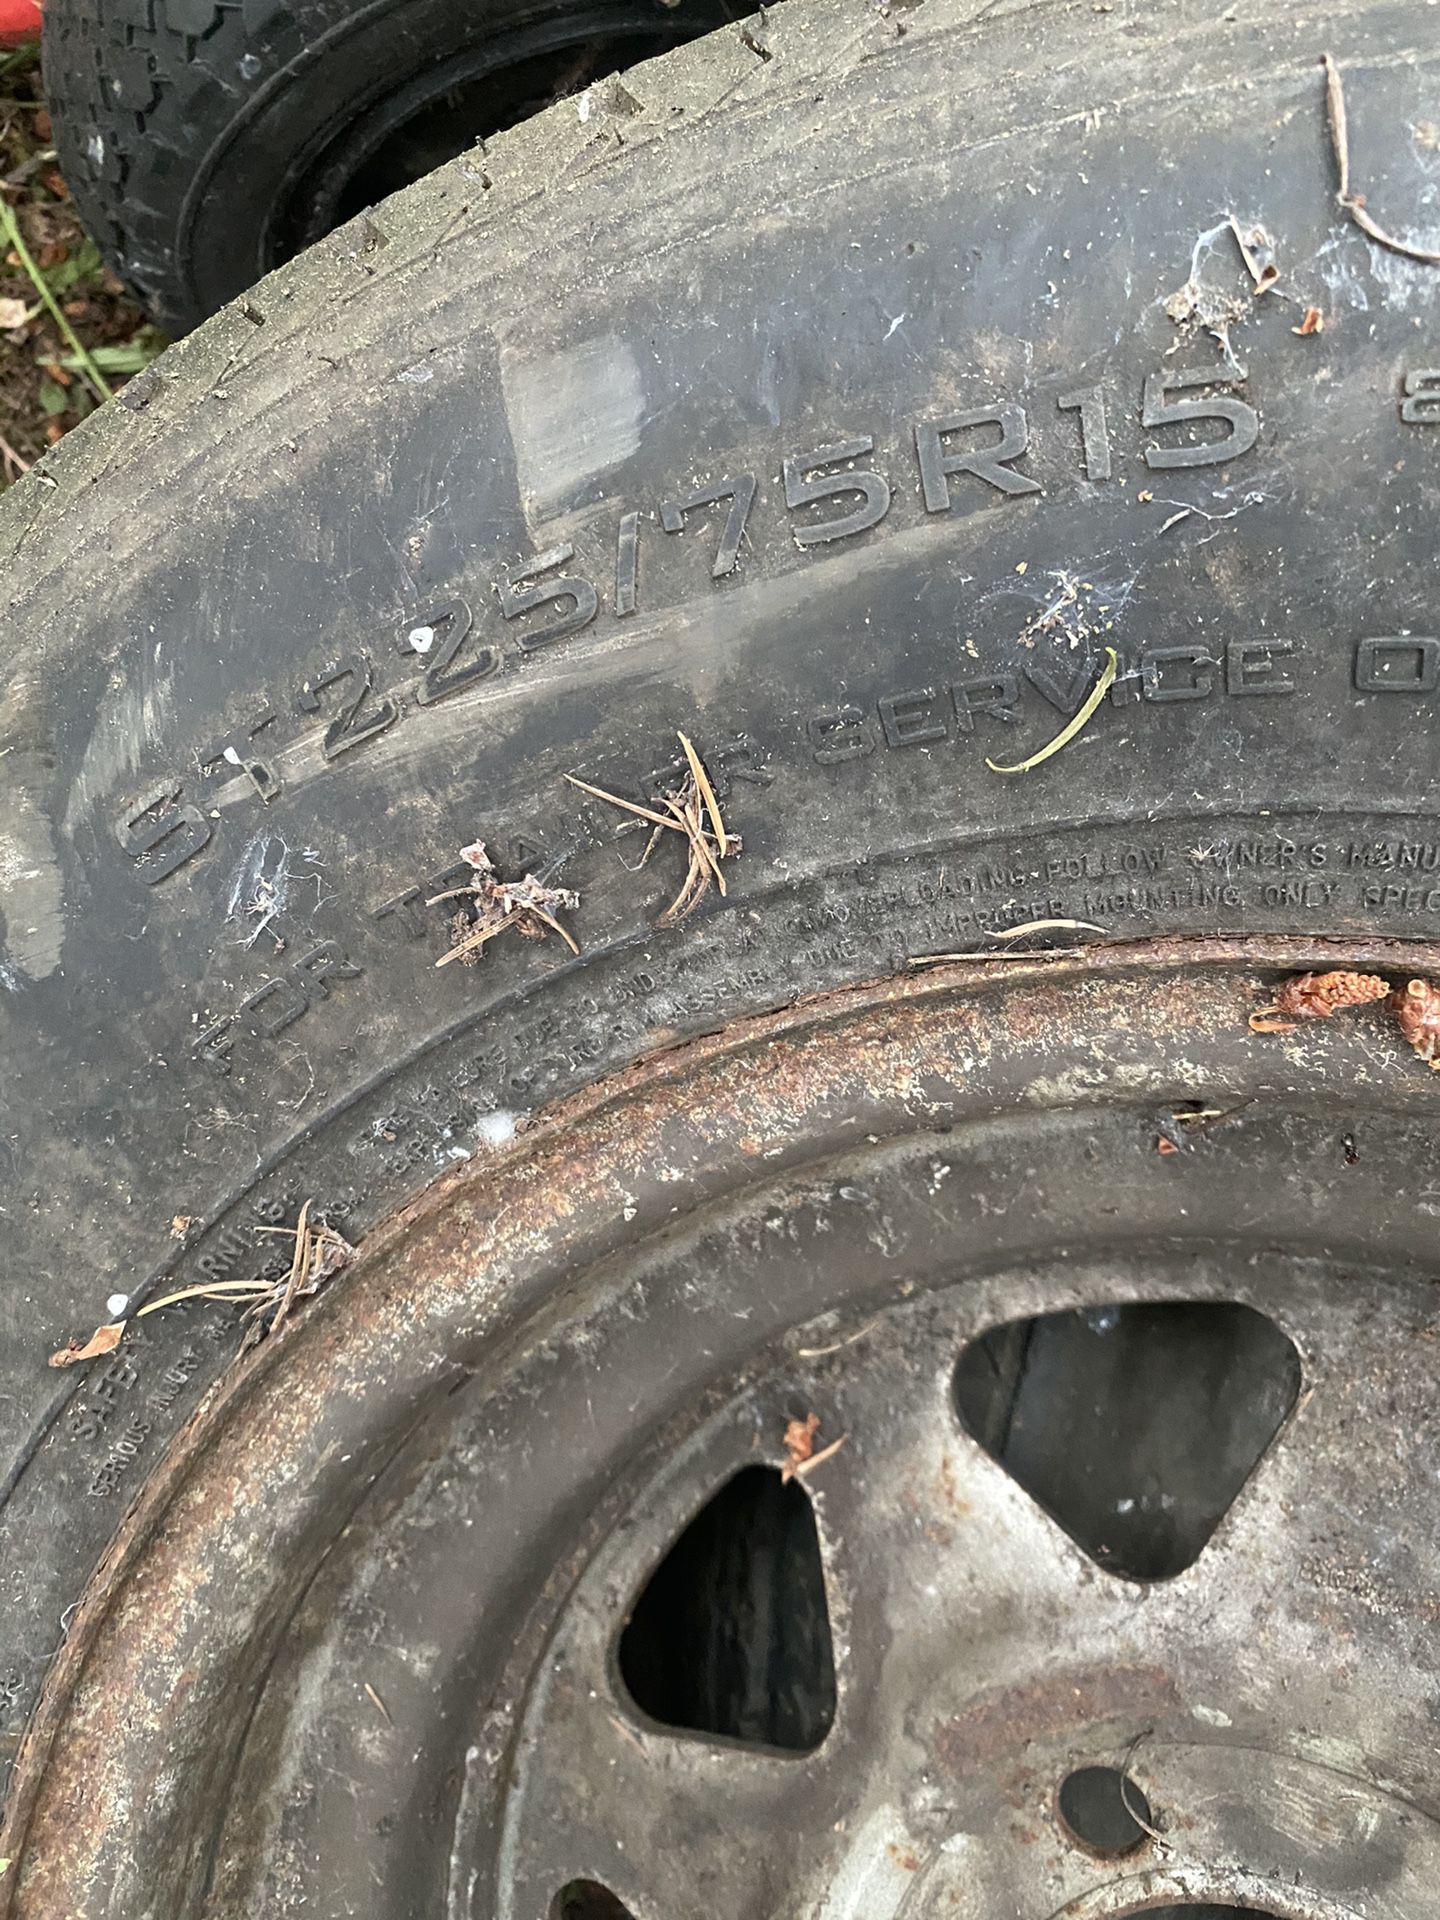 ***FREE TIRES***PICK UP ONLY**